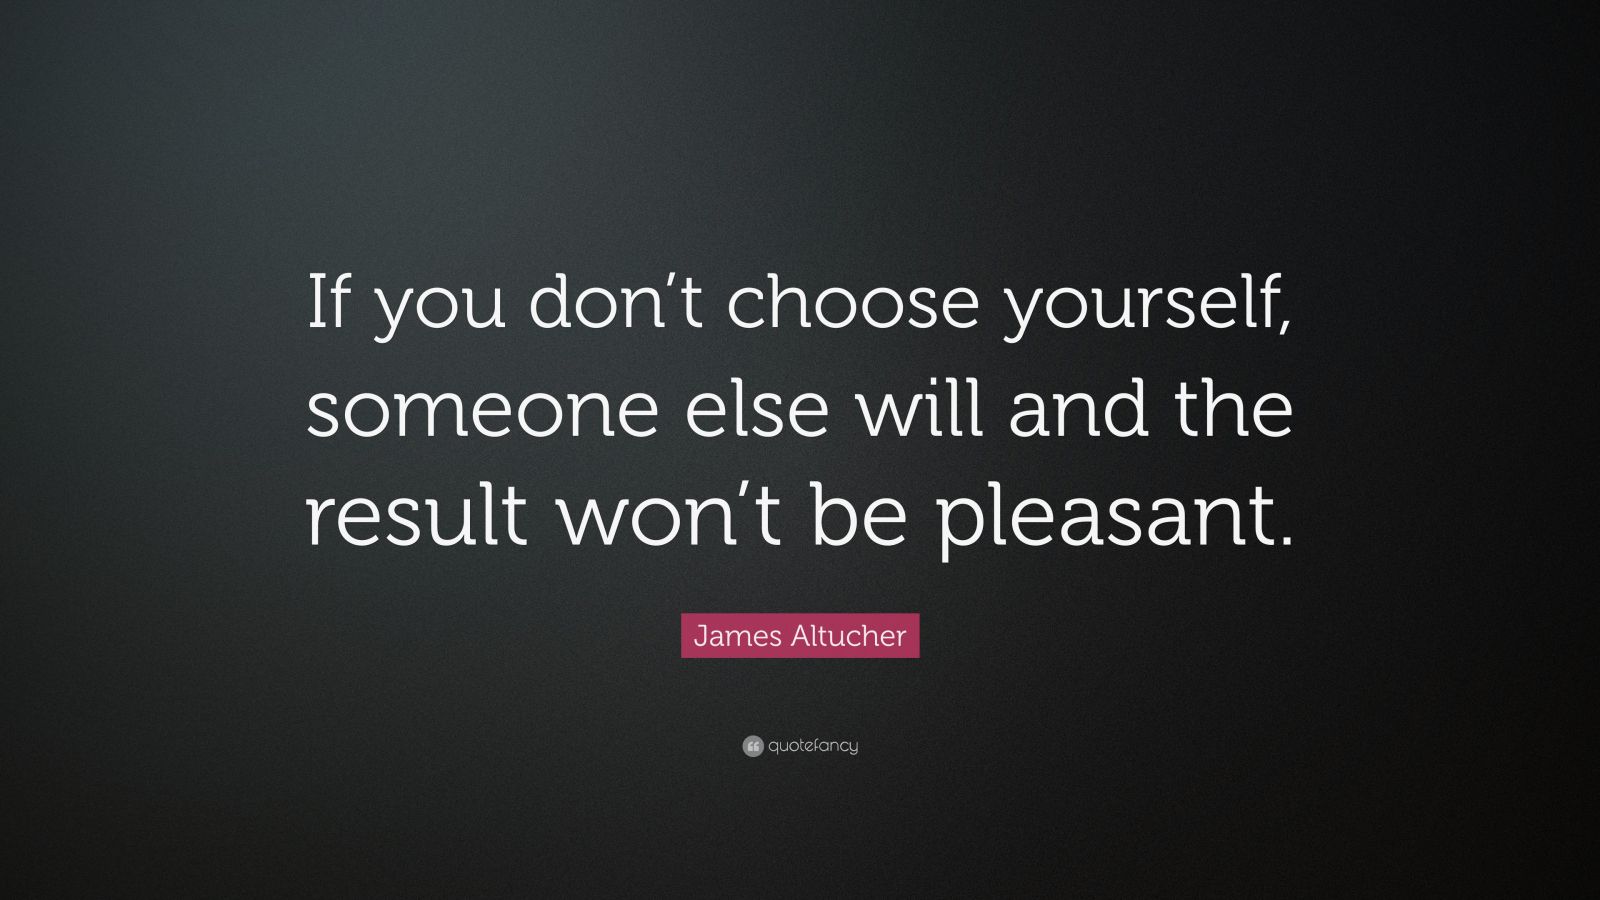 James Altucher Quote: “If you don't choose yourself, someone else will and  the result won't be pleasant.”